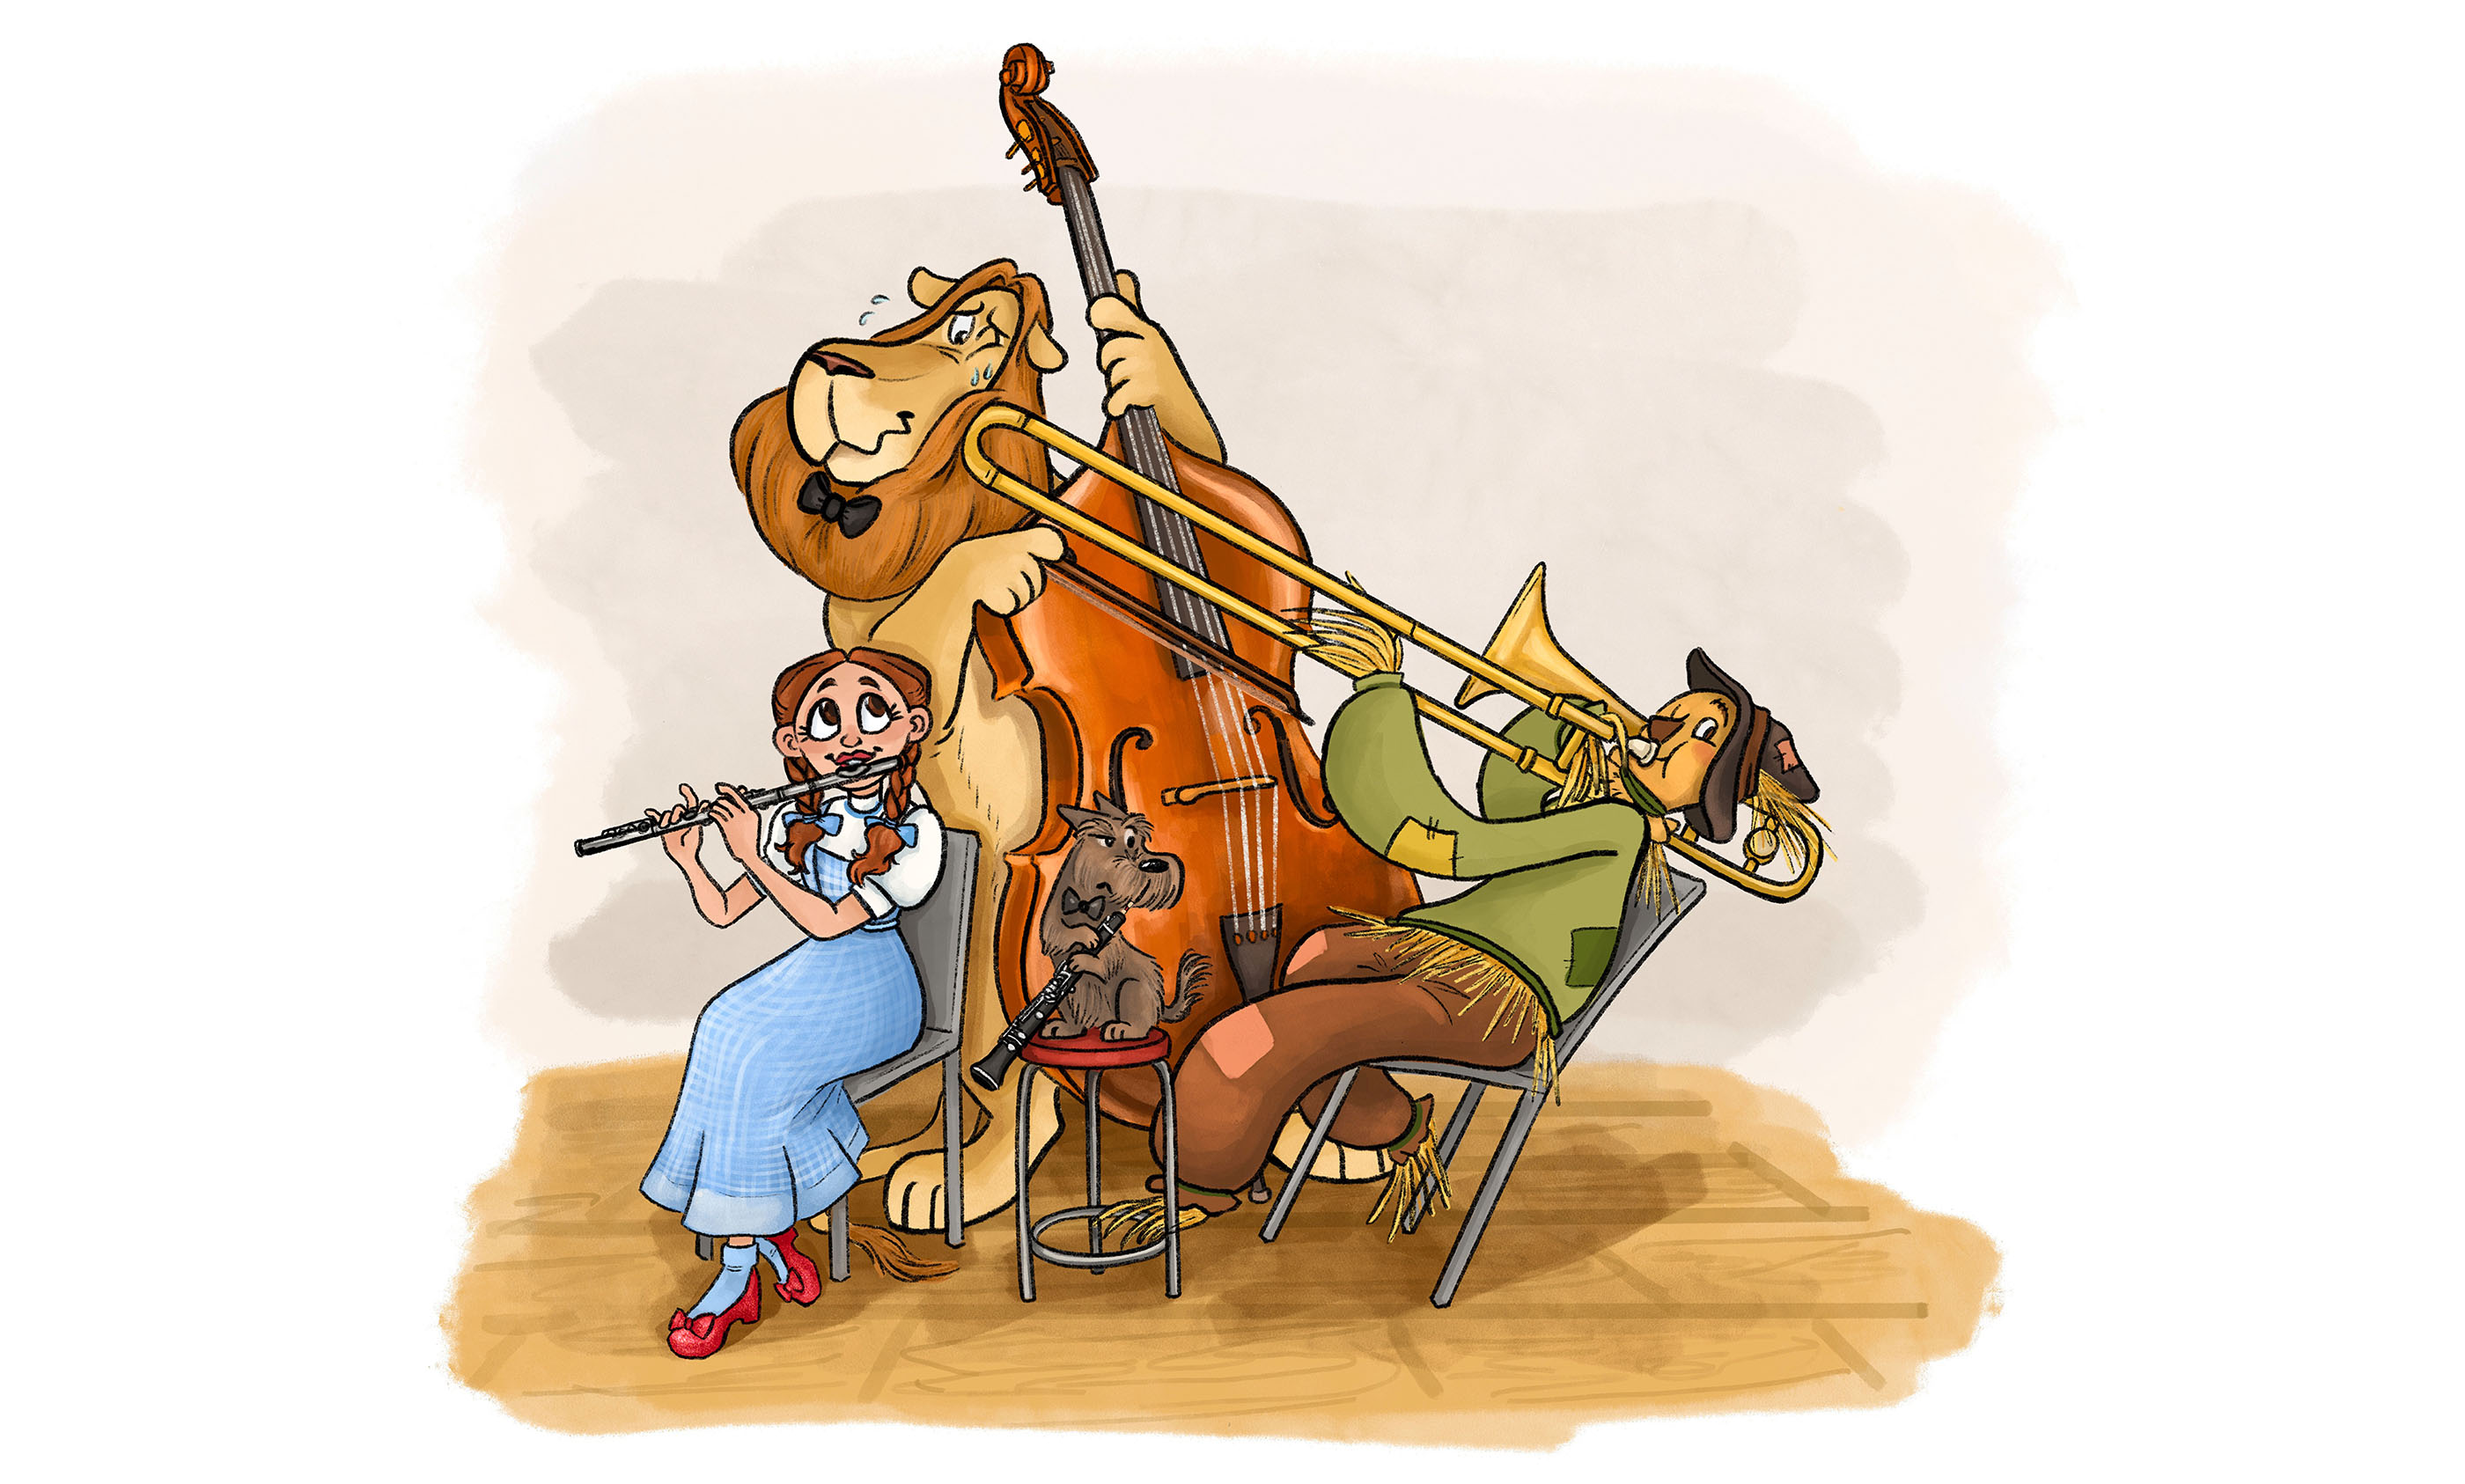 An illustration of Wizard of Oz characters playing instruments.